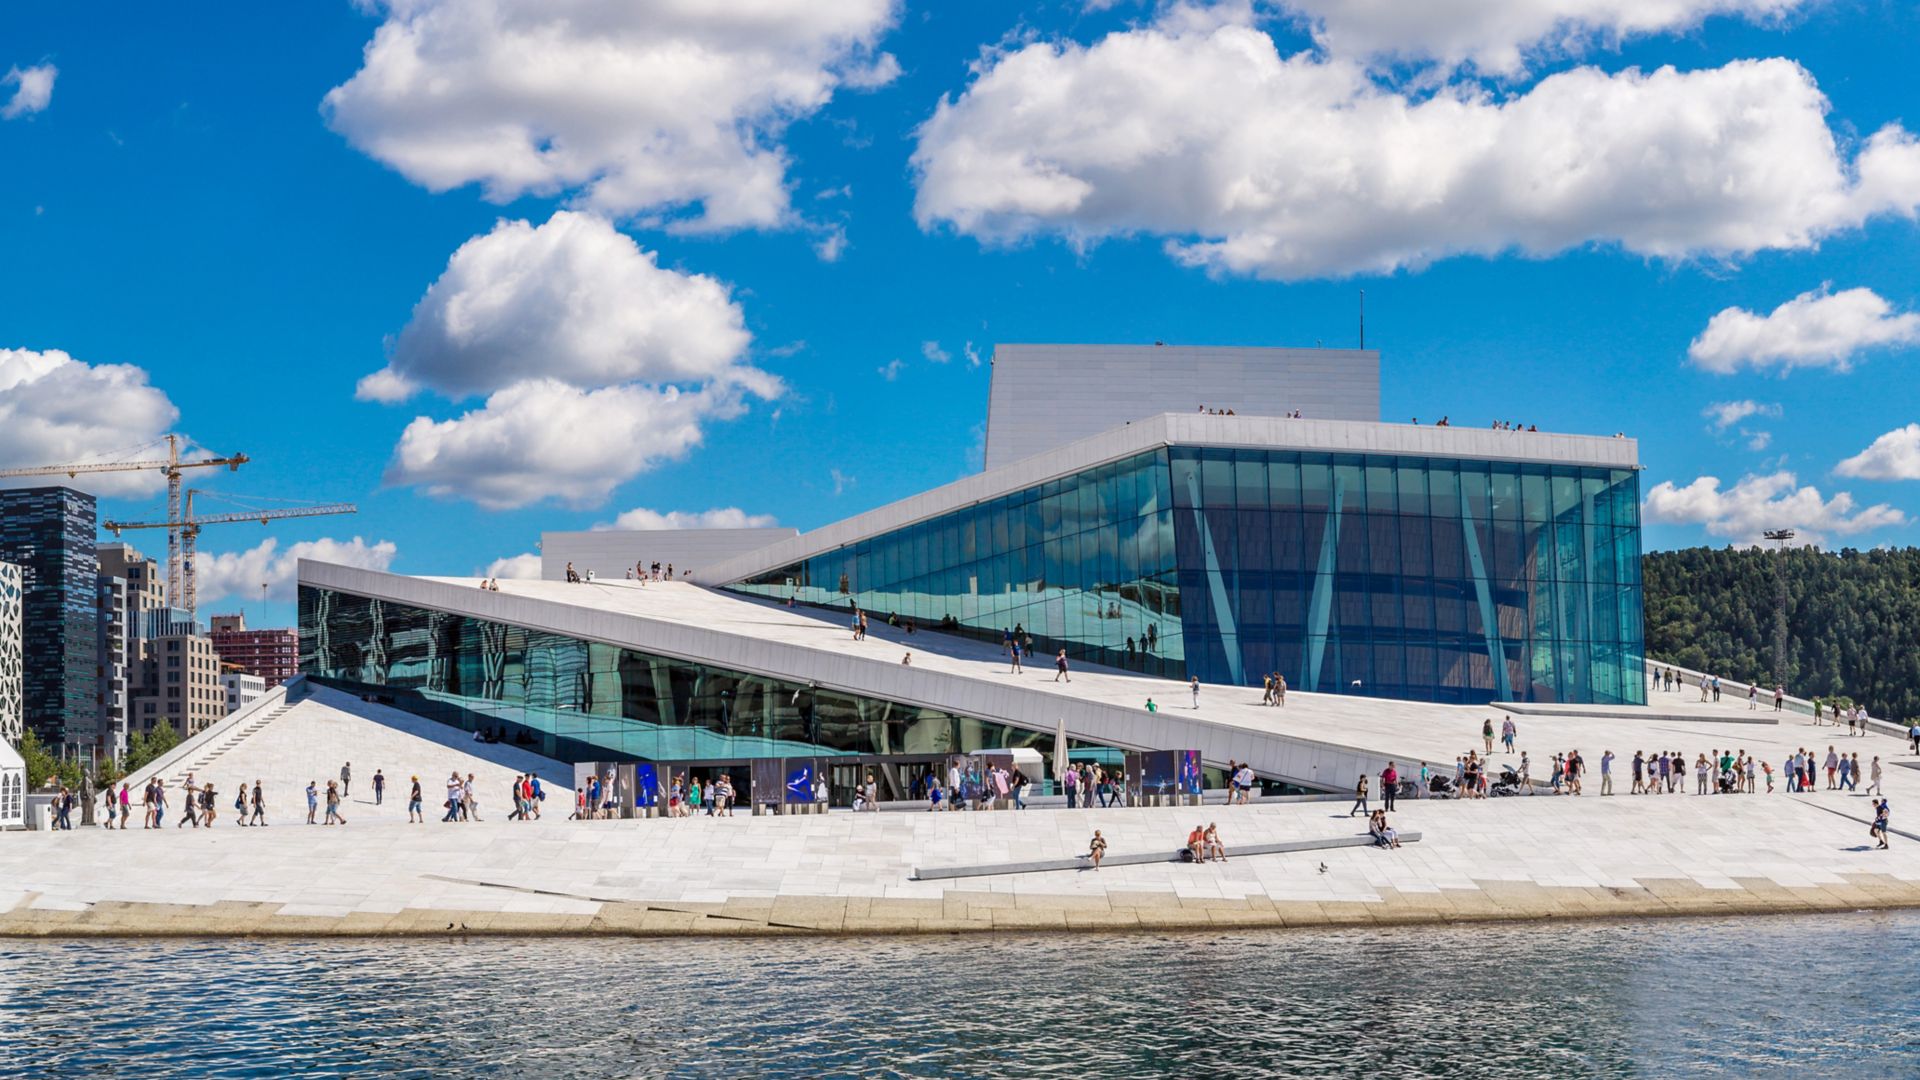 OSLO, NORWAY - JULY 29: The Oslo Opera House is the home of The Norwegian National Opera and Ballet, and the national opera theatre in Norway in Oslo, Norway on July 29, 2014